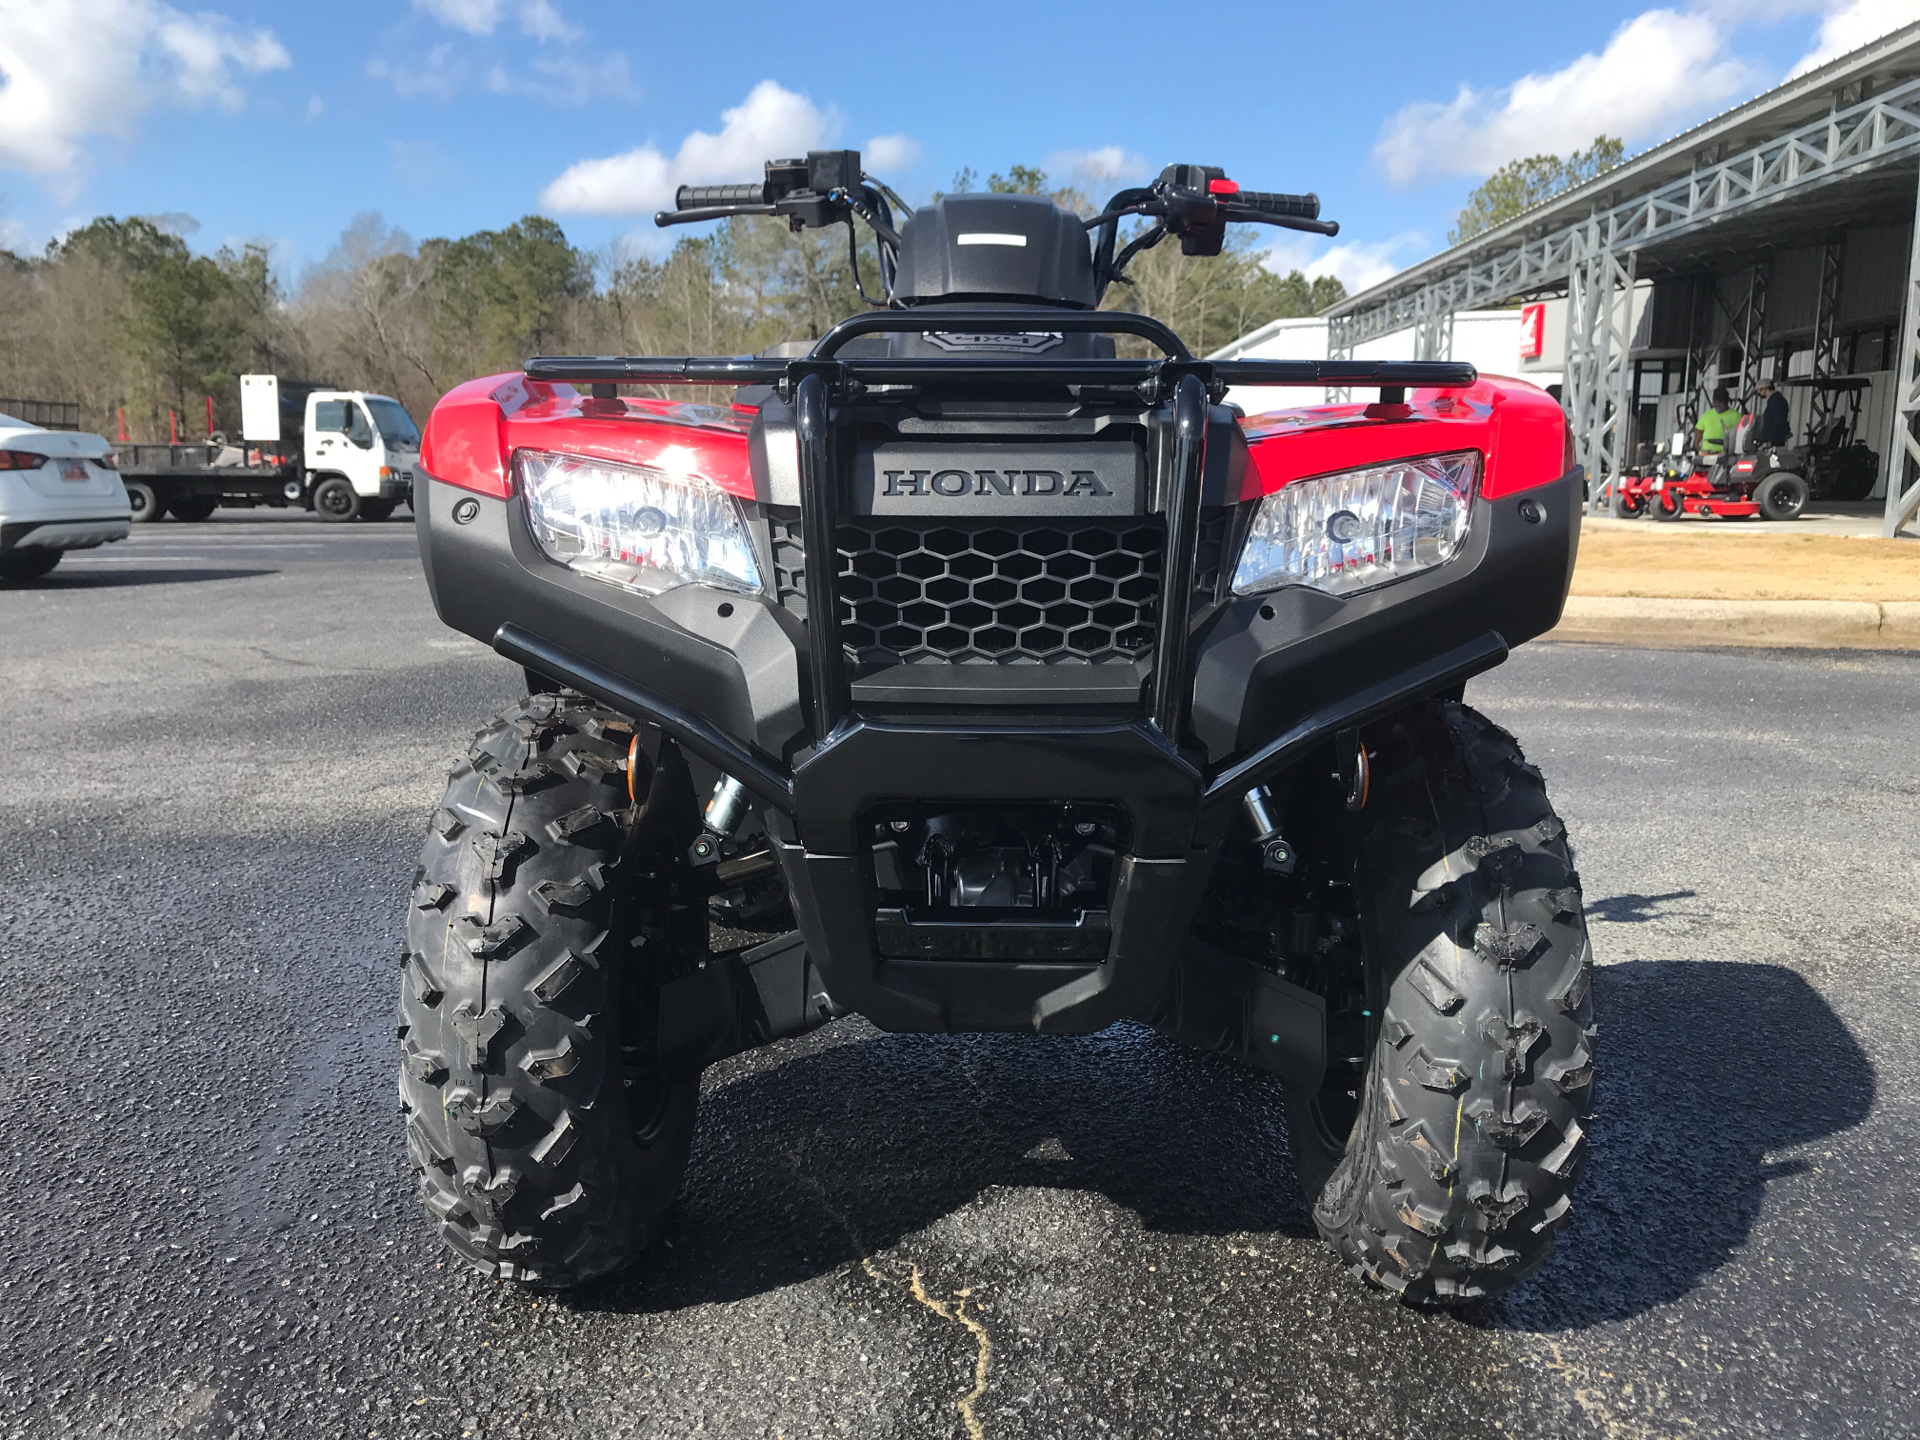 2022 Honda FourTrax Rancher 4x4 Automatic DCT EPS in Greenville, North Carolina - Photo 3